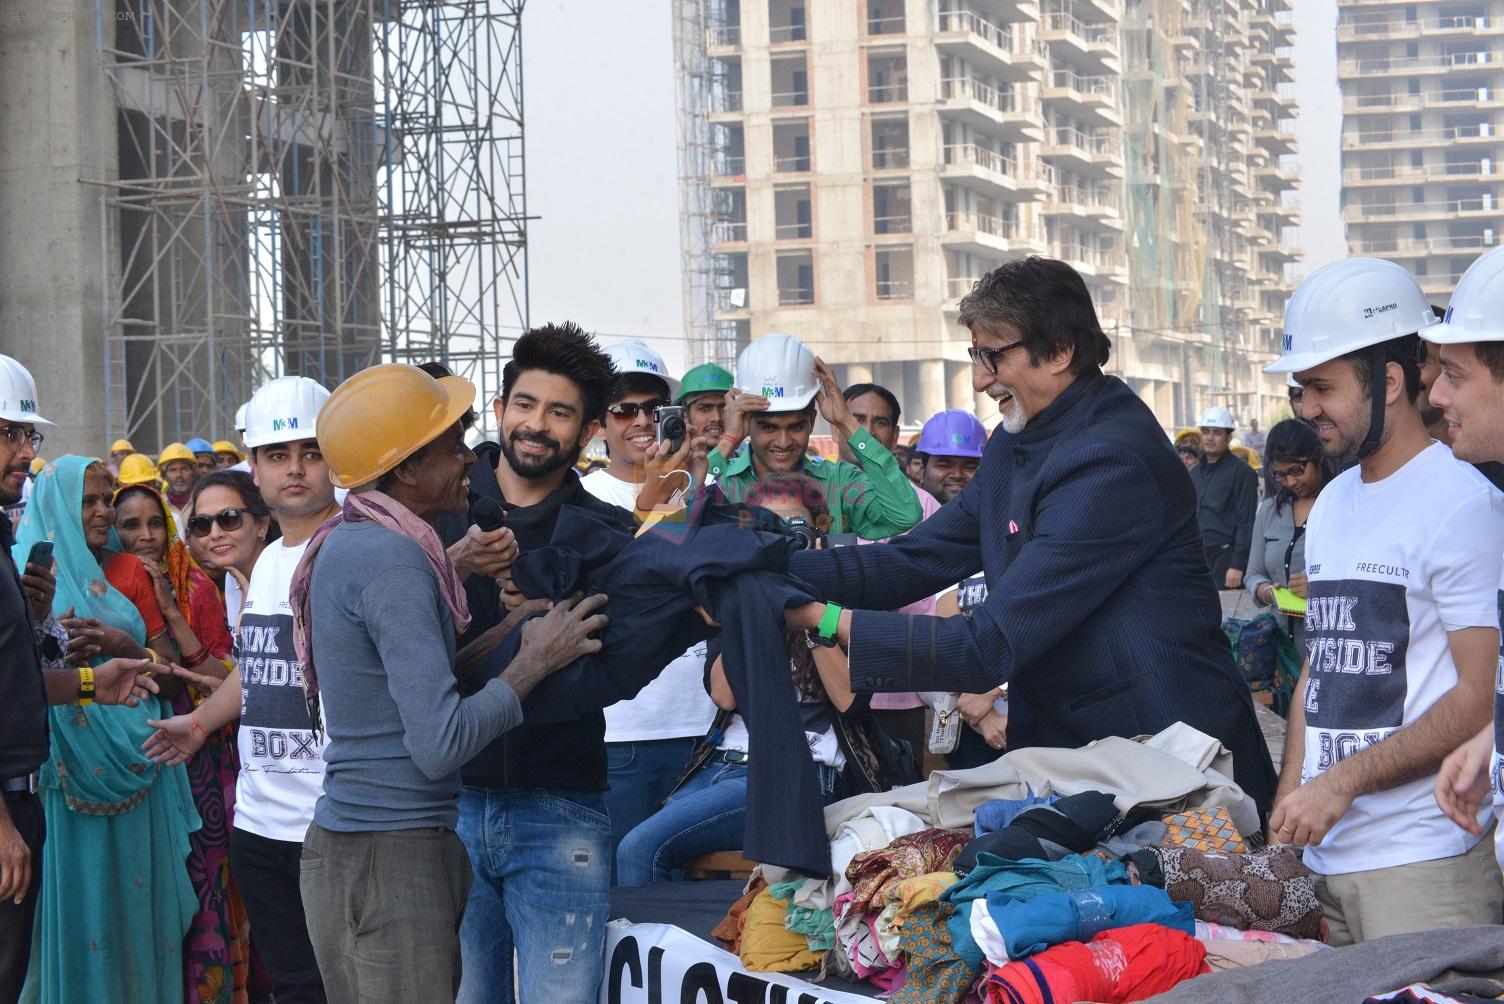 Amitabh Bachchan donating clothes at Gurgaon construction site for Clothes Box Foundation donation